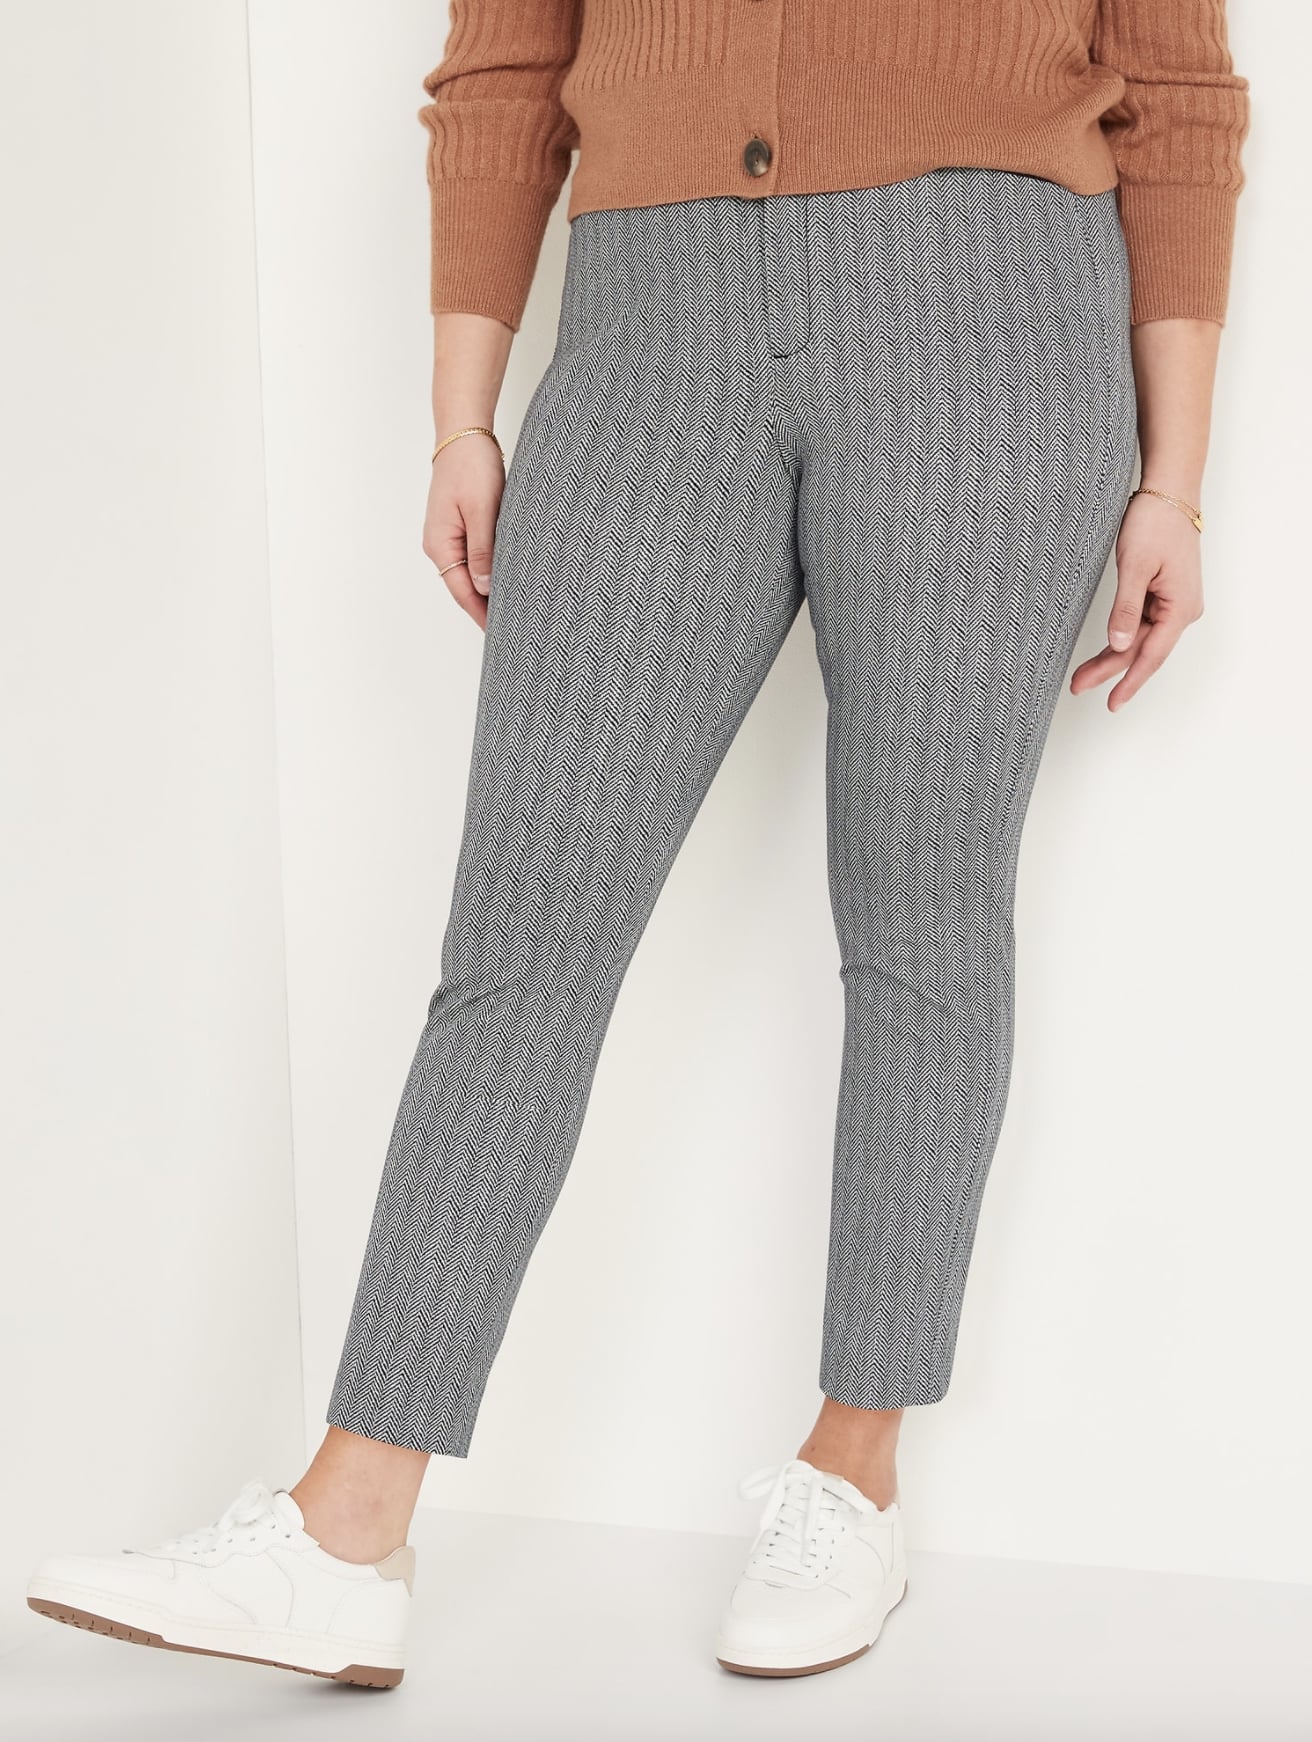 Old Navy High Rise Pixie Ankle Pants, Pants, Clothing & Accessories